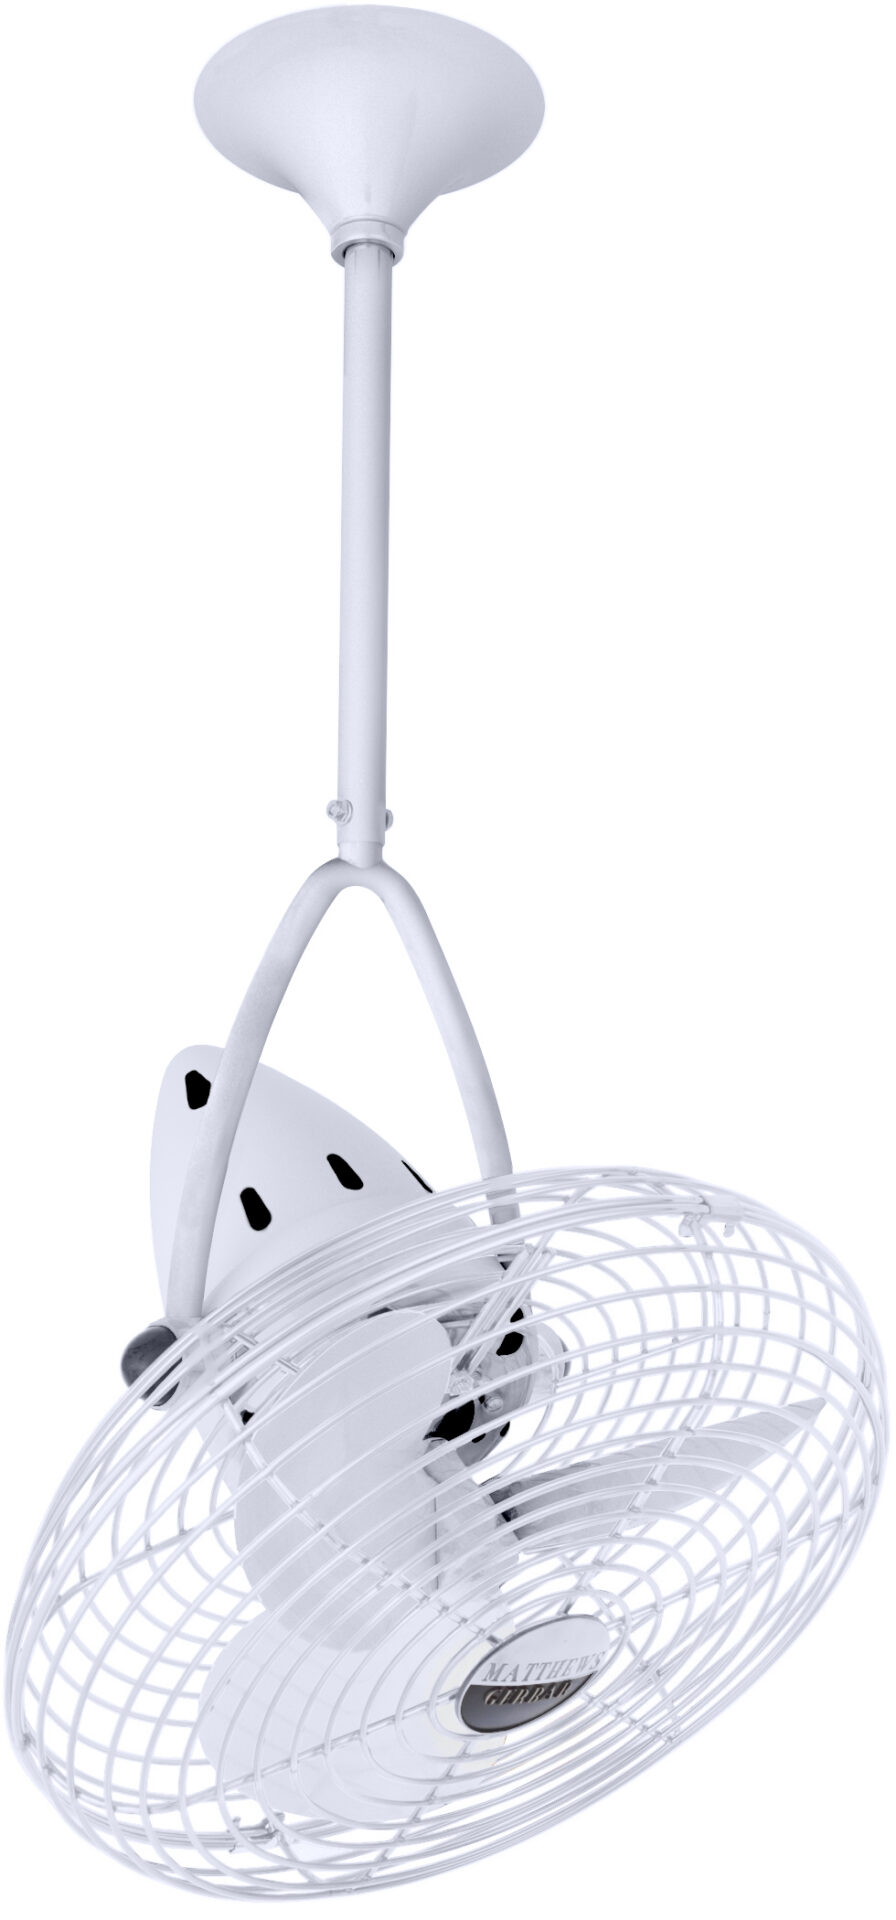 Jarold Direcional ceiling fan in gloss white finish with Metal blades in safety cage made by Matthews Fan Company.